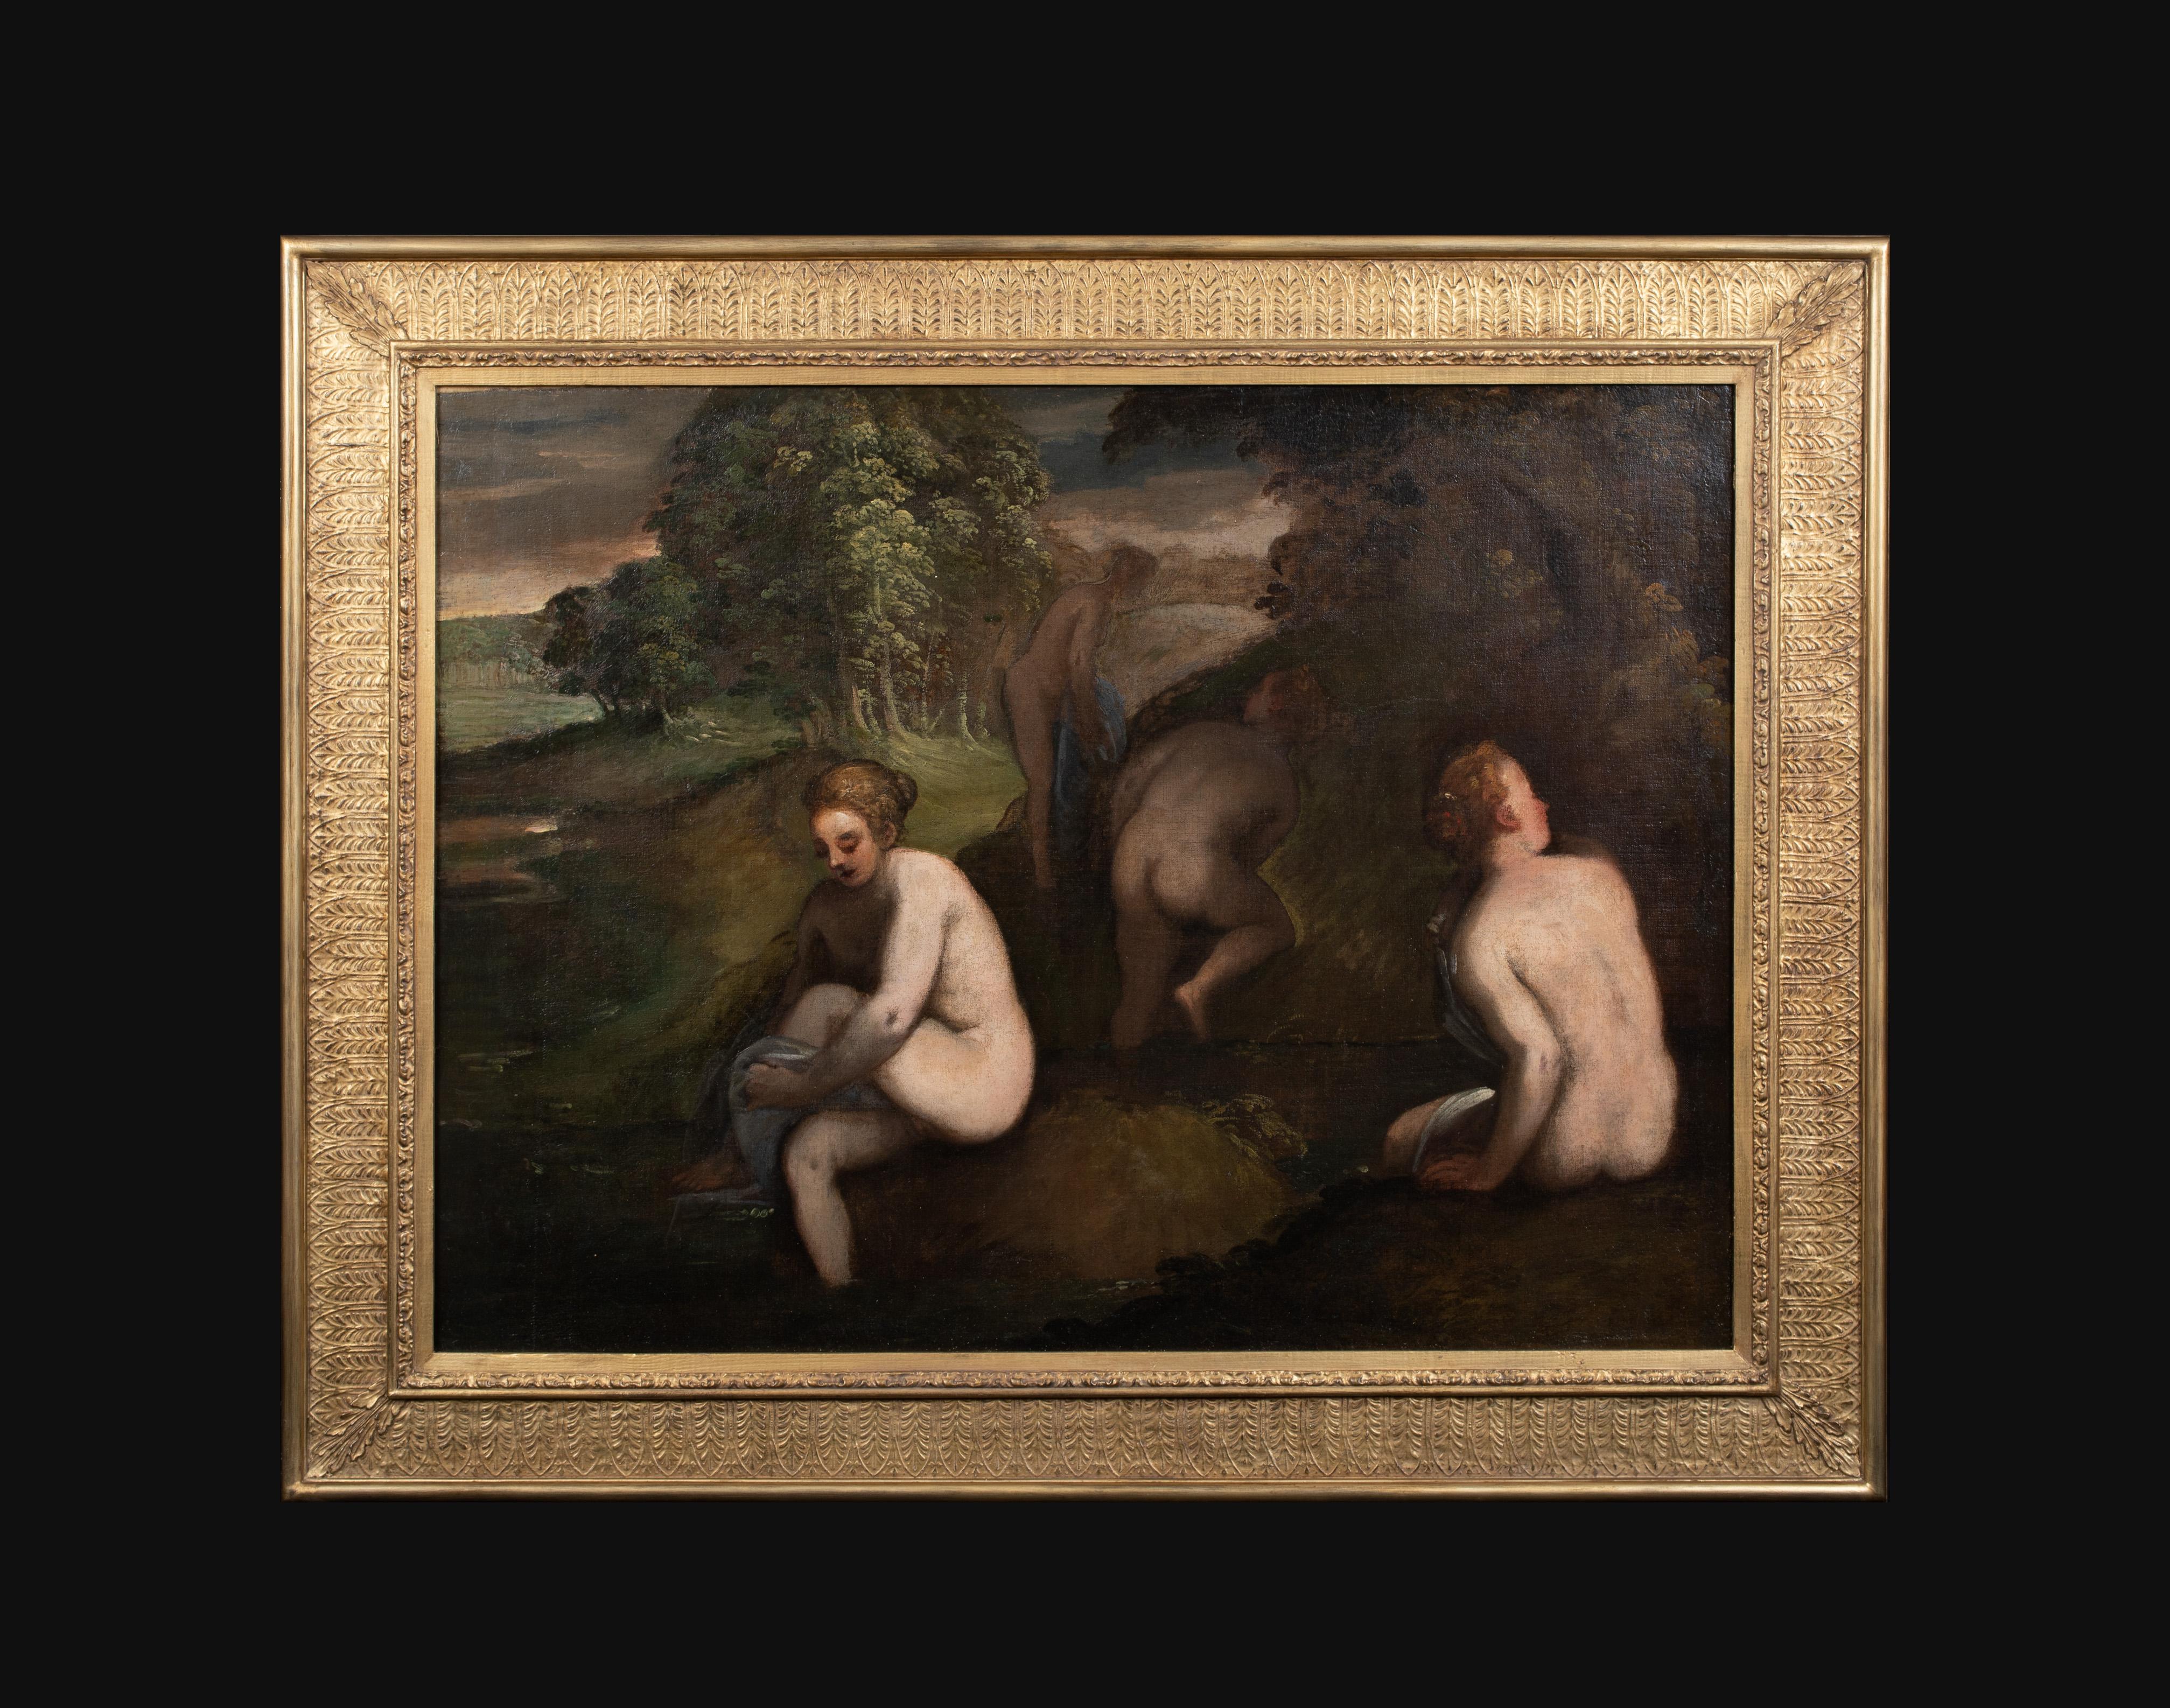 Nudes Bathing in A Landscape, 16th/17th Century - Painting by Unknown